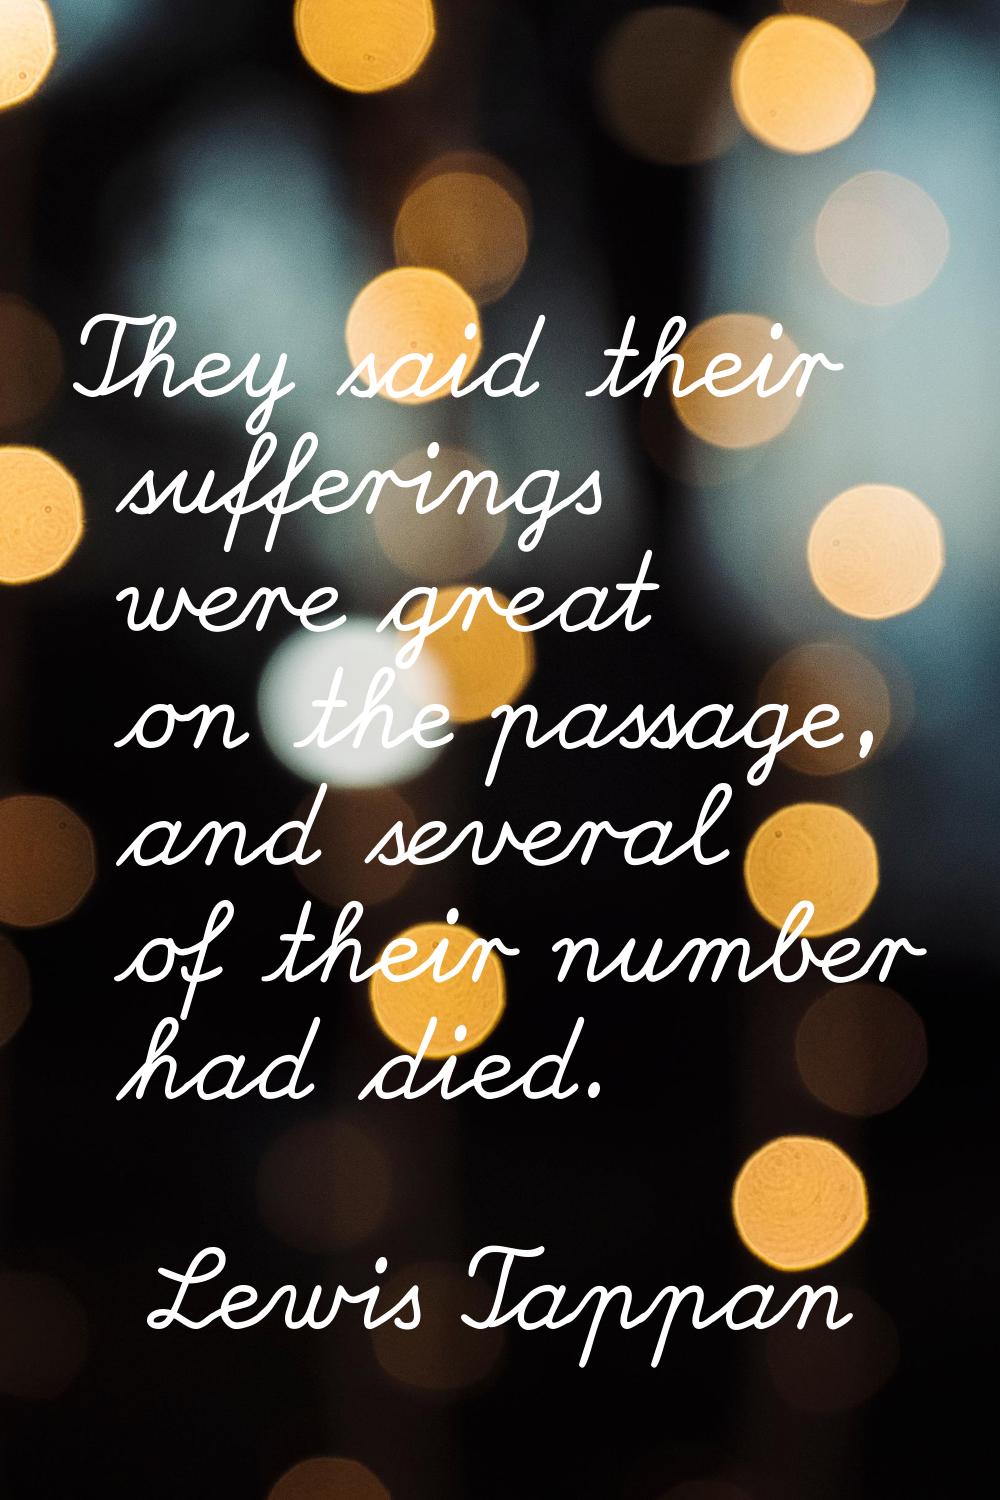 They said their sufferings were great on the passage, and several of their number had died.